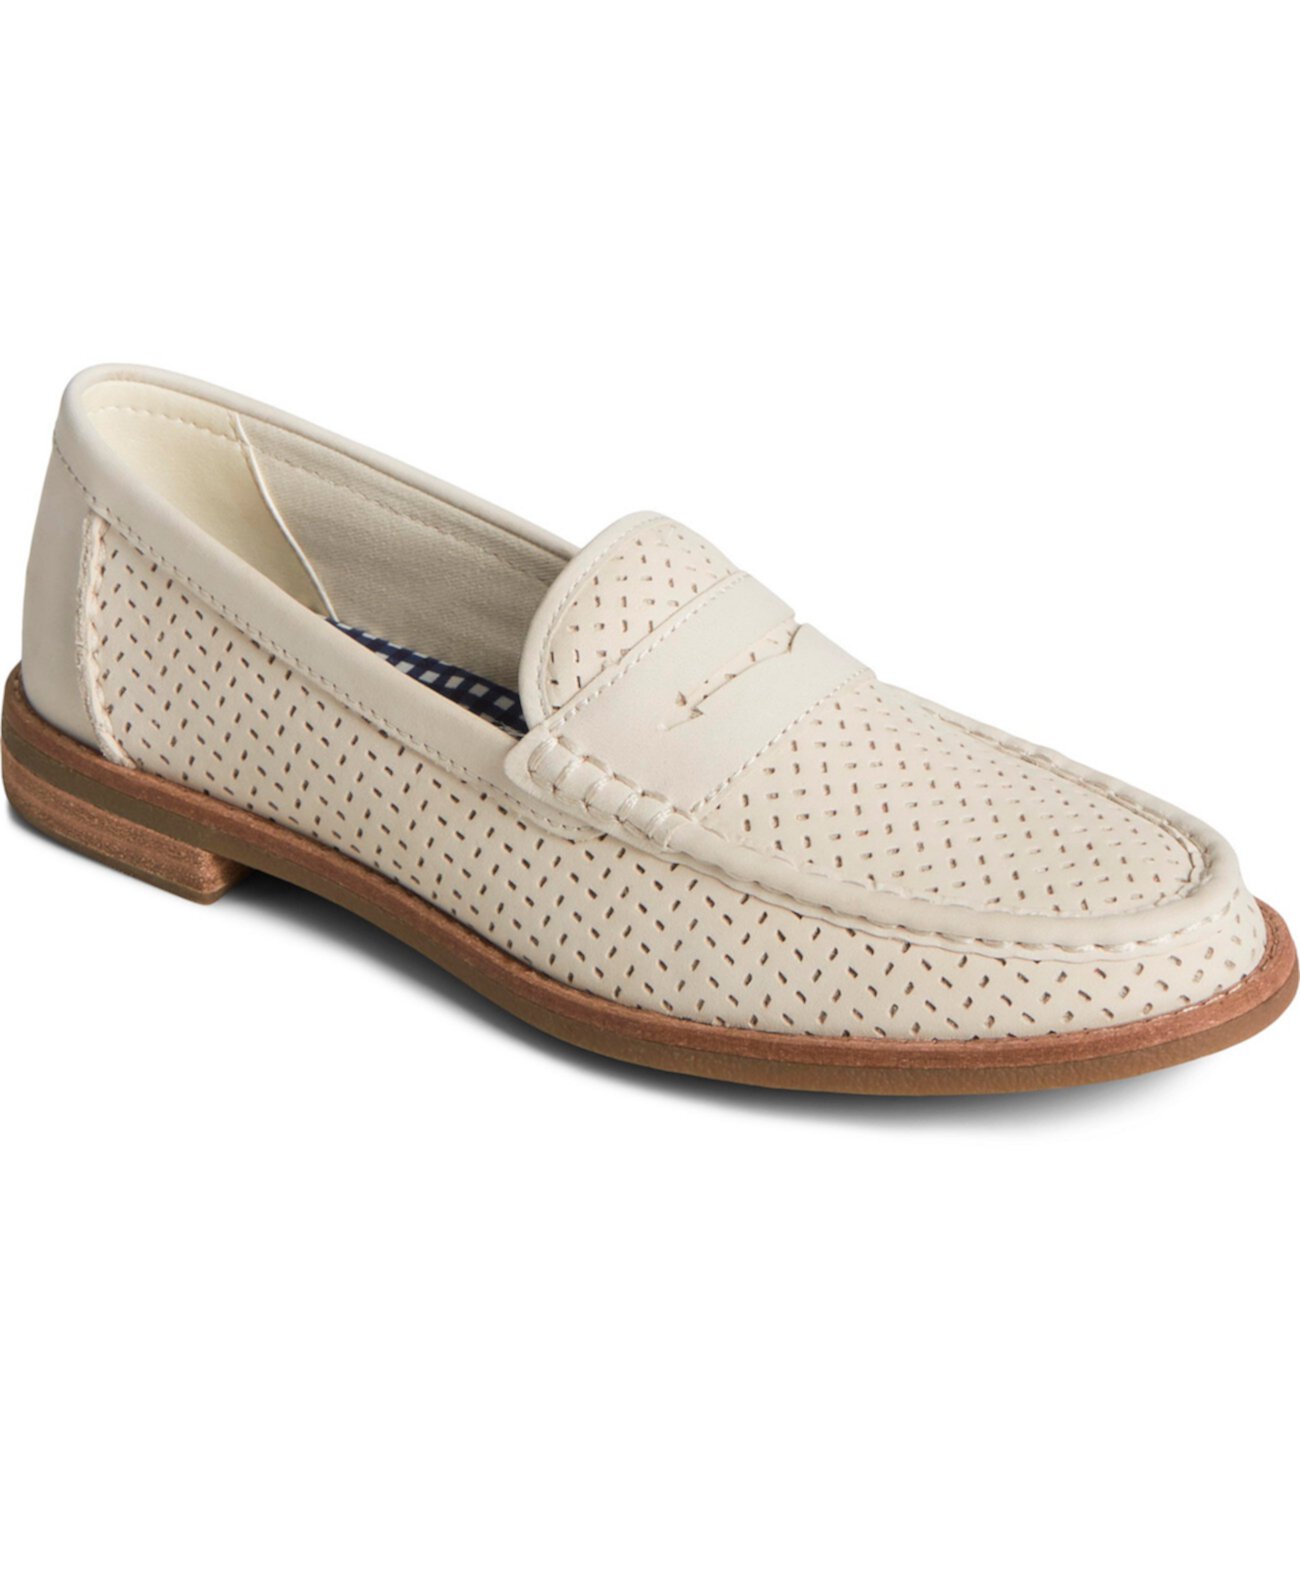 Women's Seaport Penny Leather Ivory Loafers Sperry